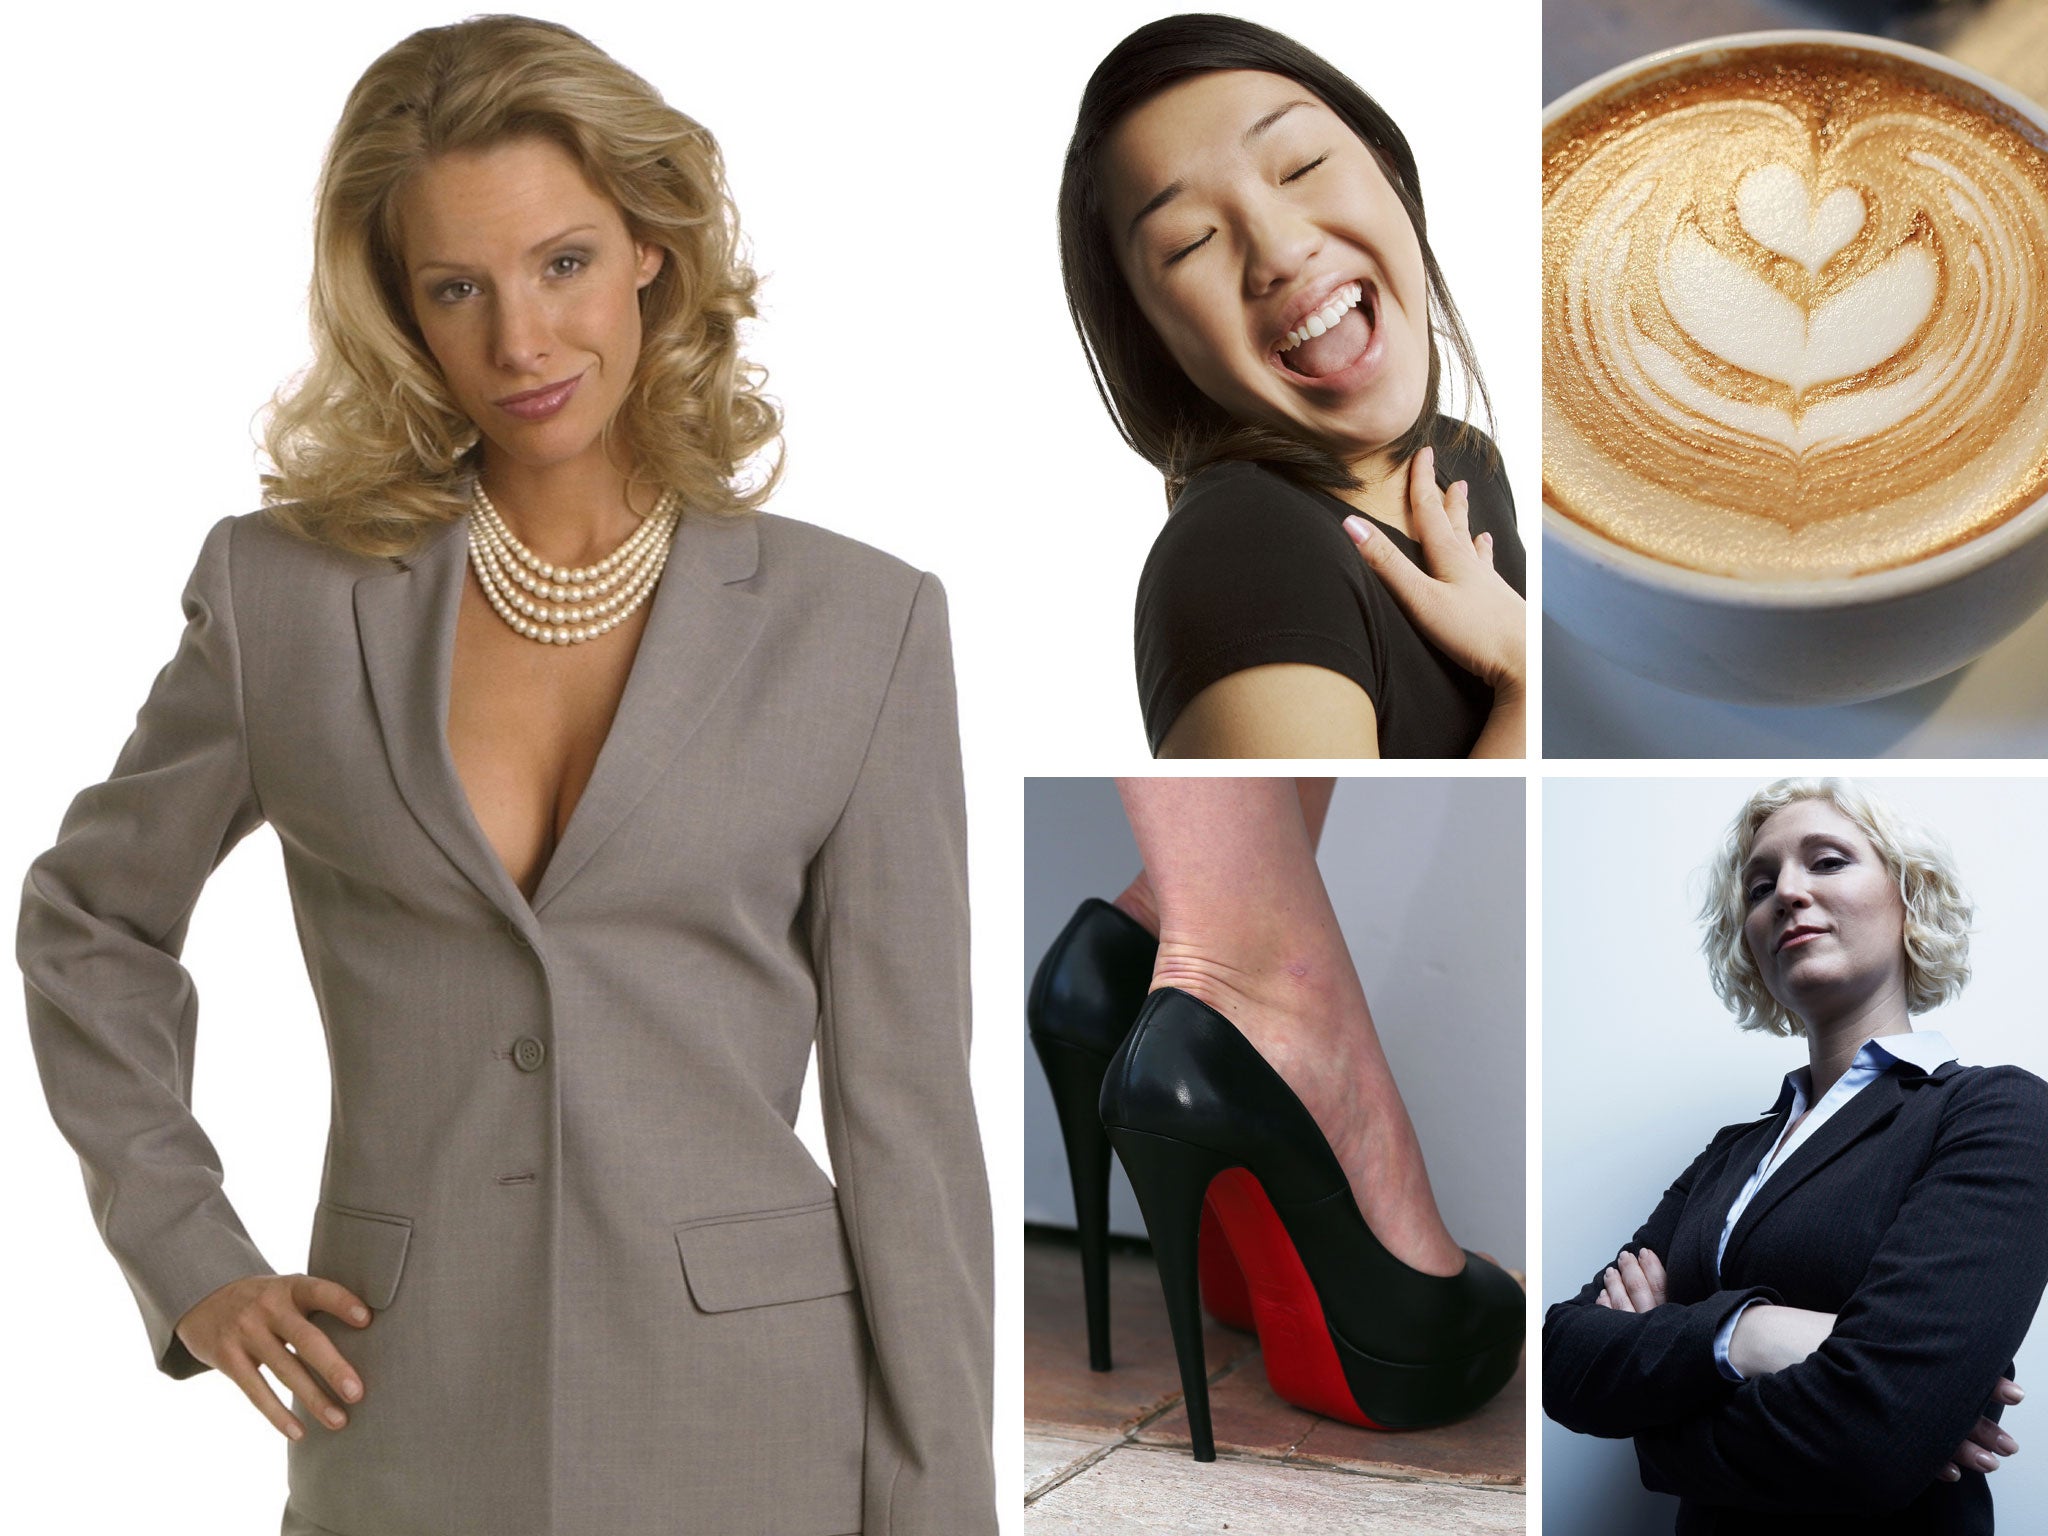 What not to do: show cleavage; giggle; drink coffee; cross your arms; wear high heels